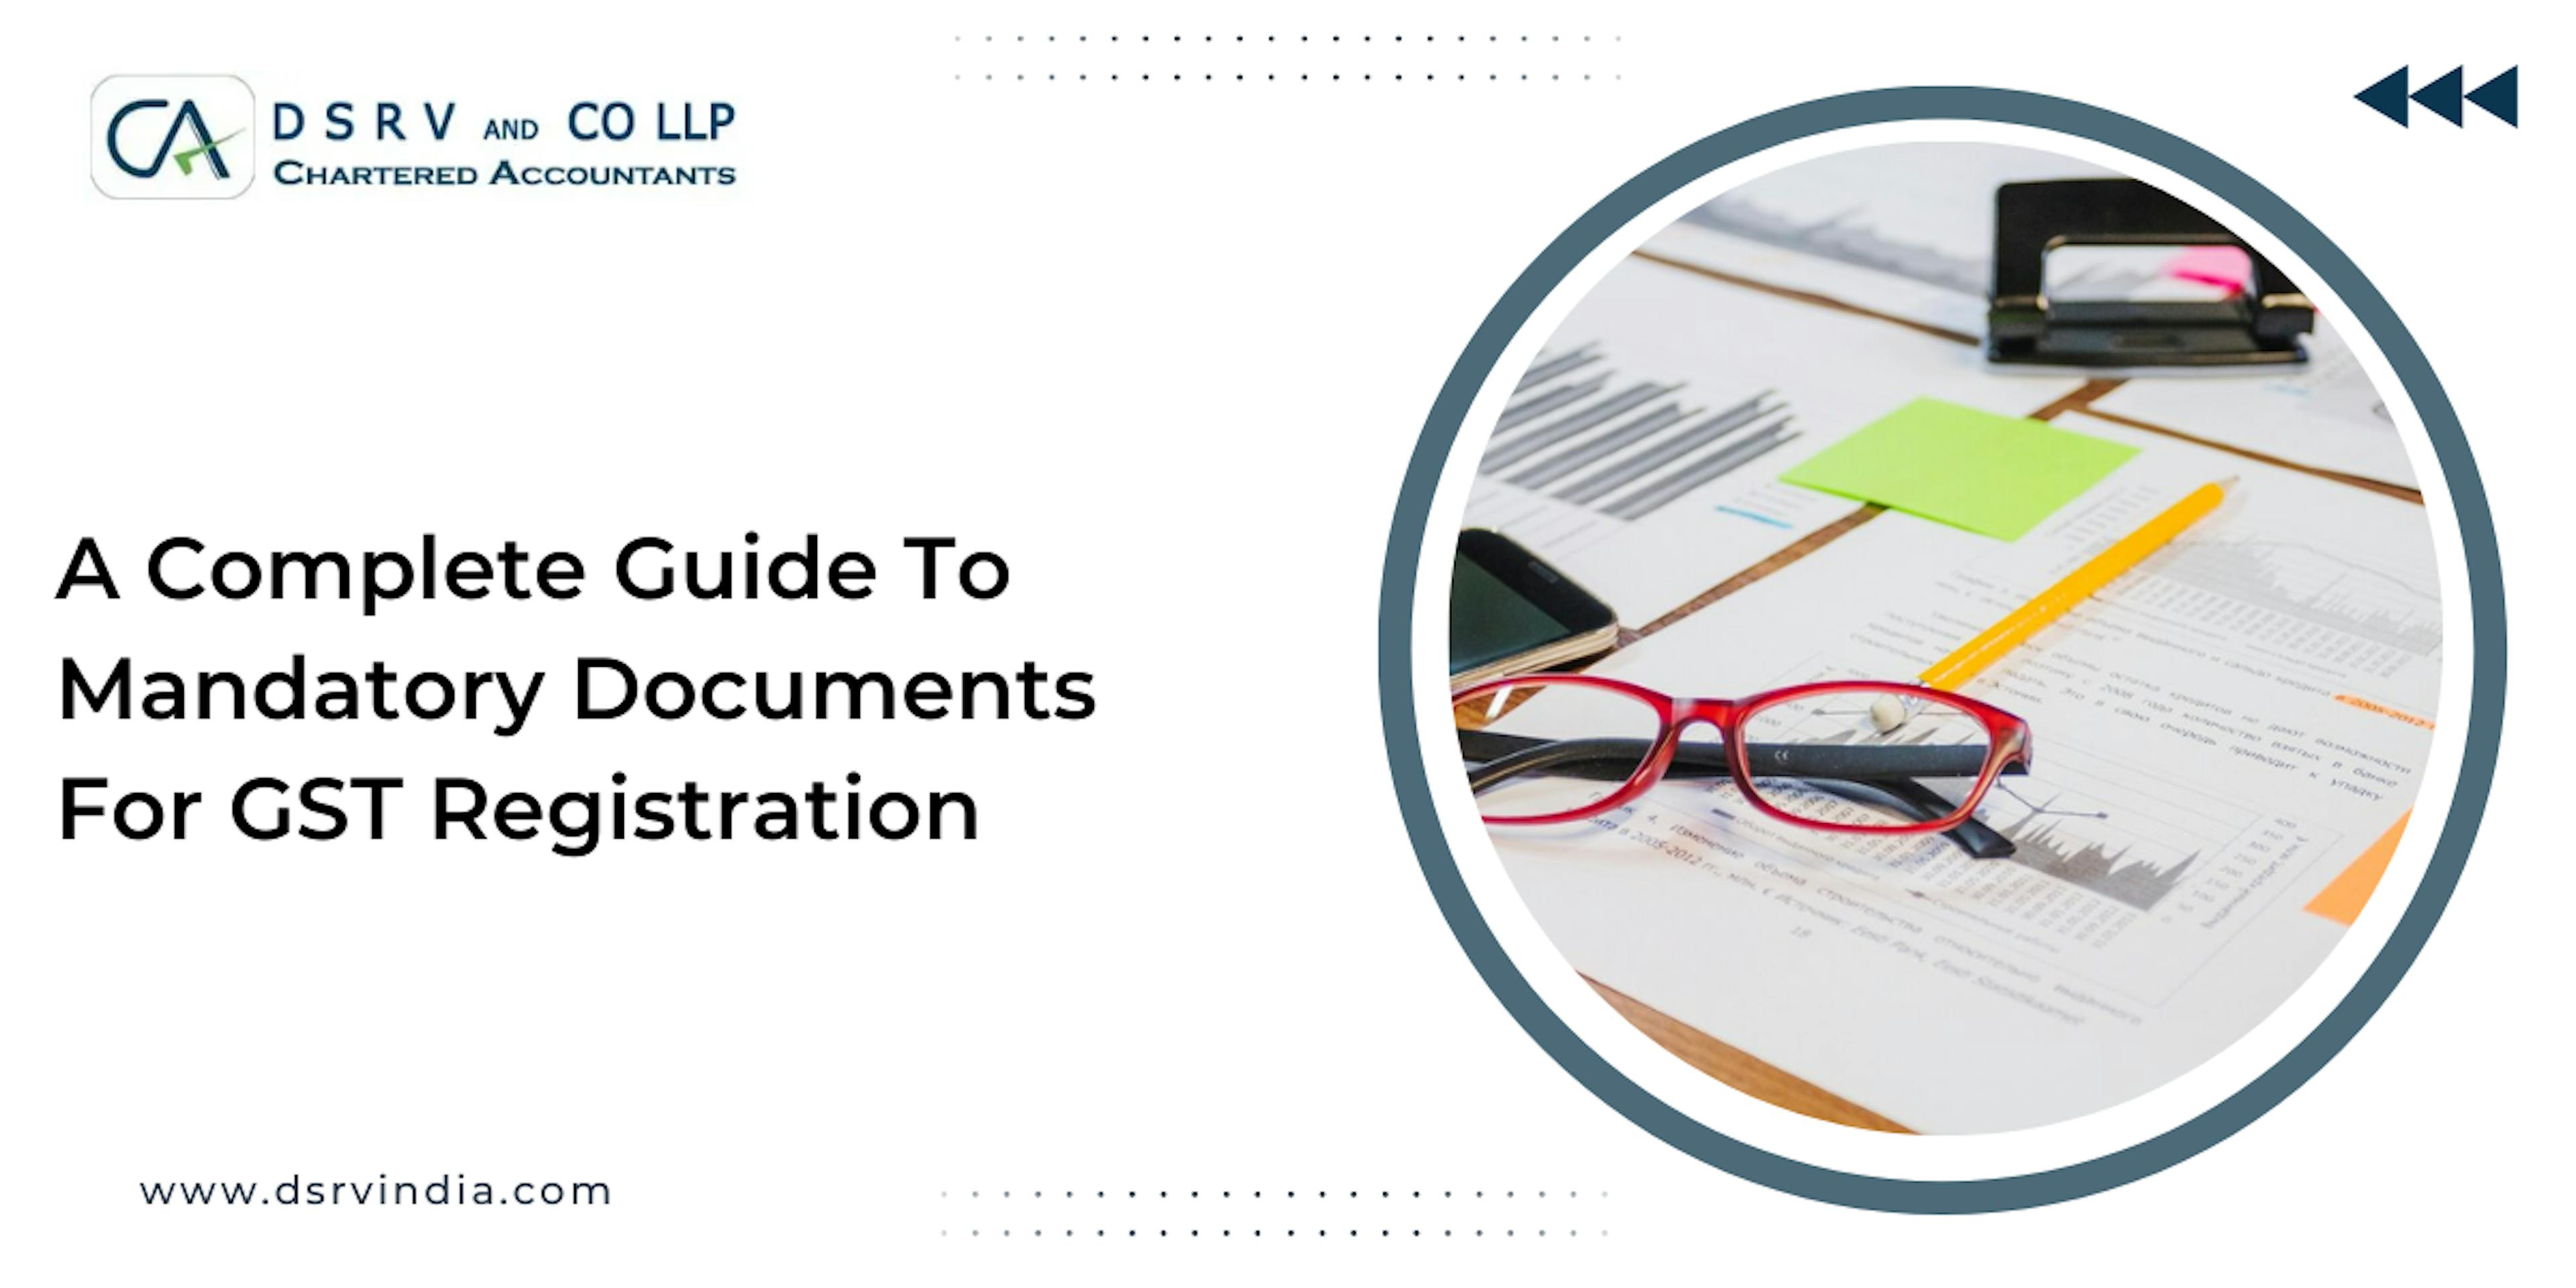 A Complete Guide To Mandatory Documents For GST Registration: Blog Poster